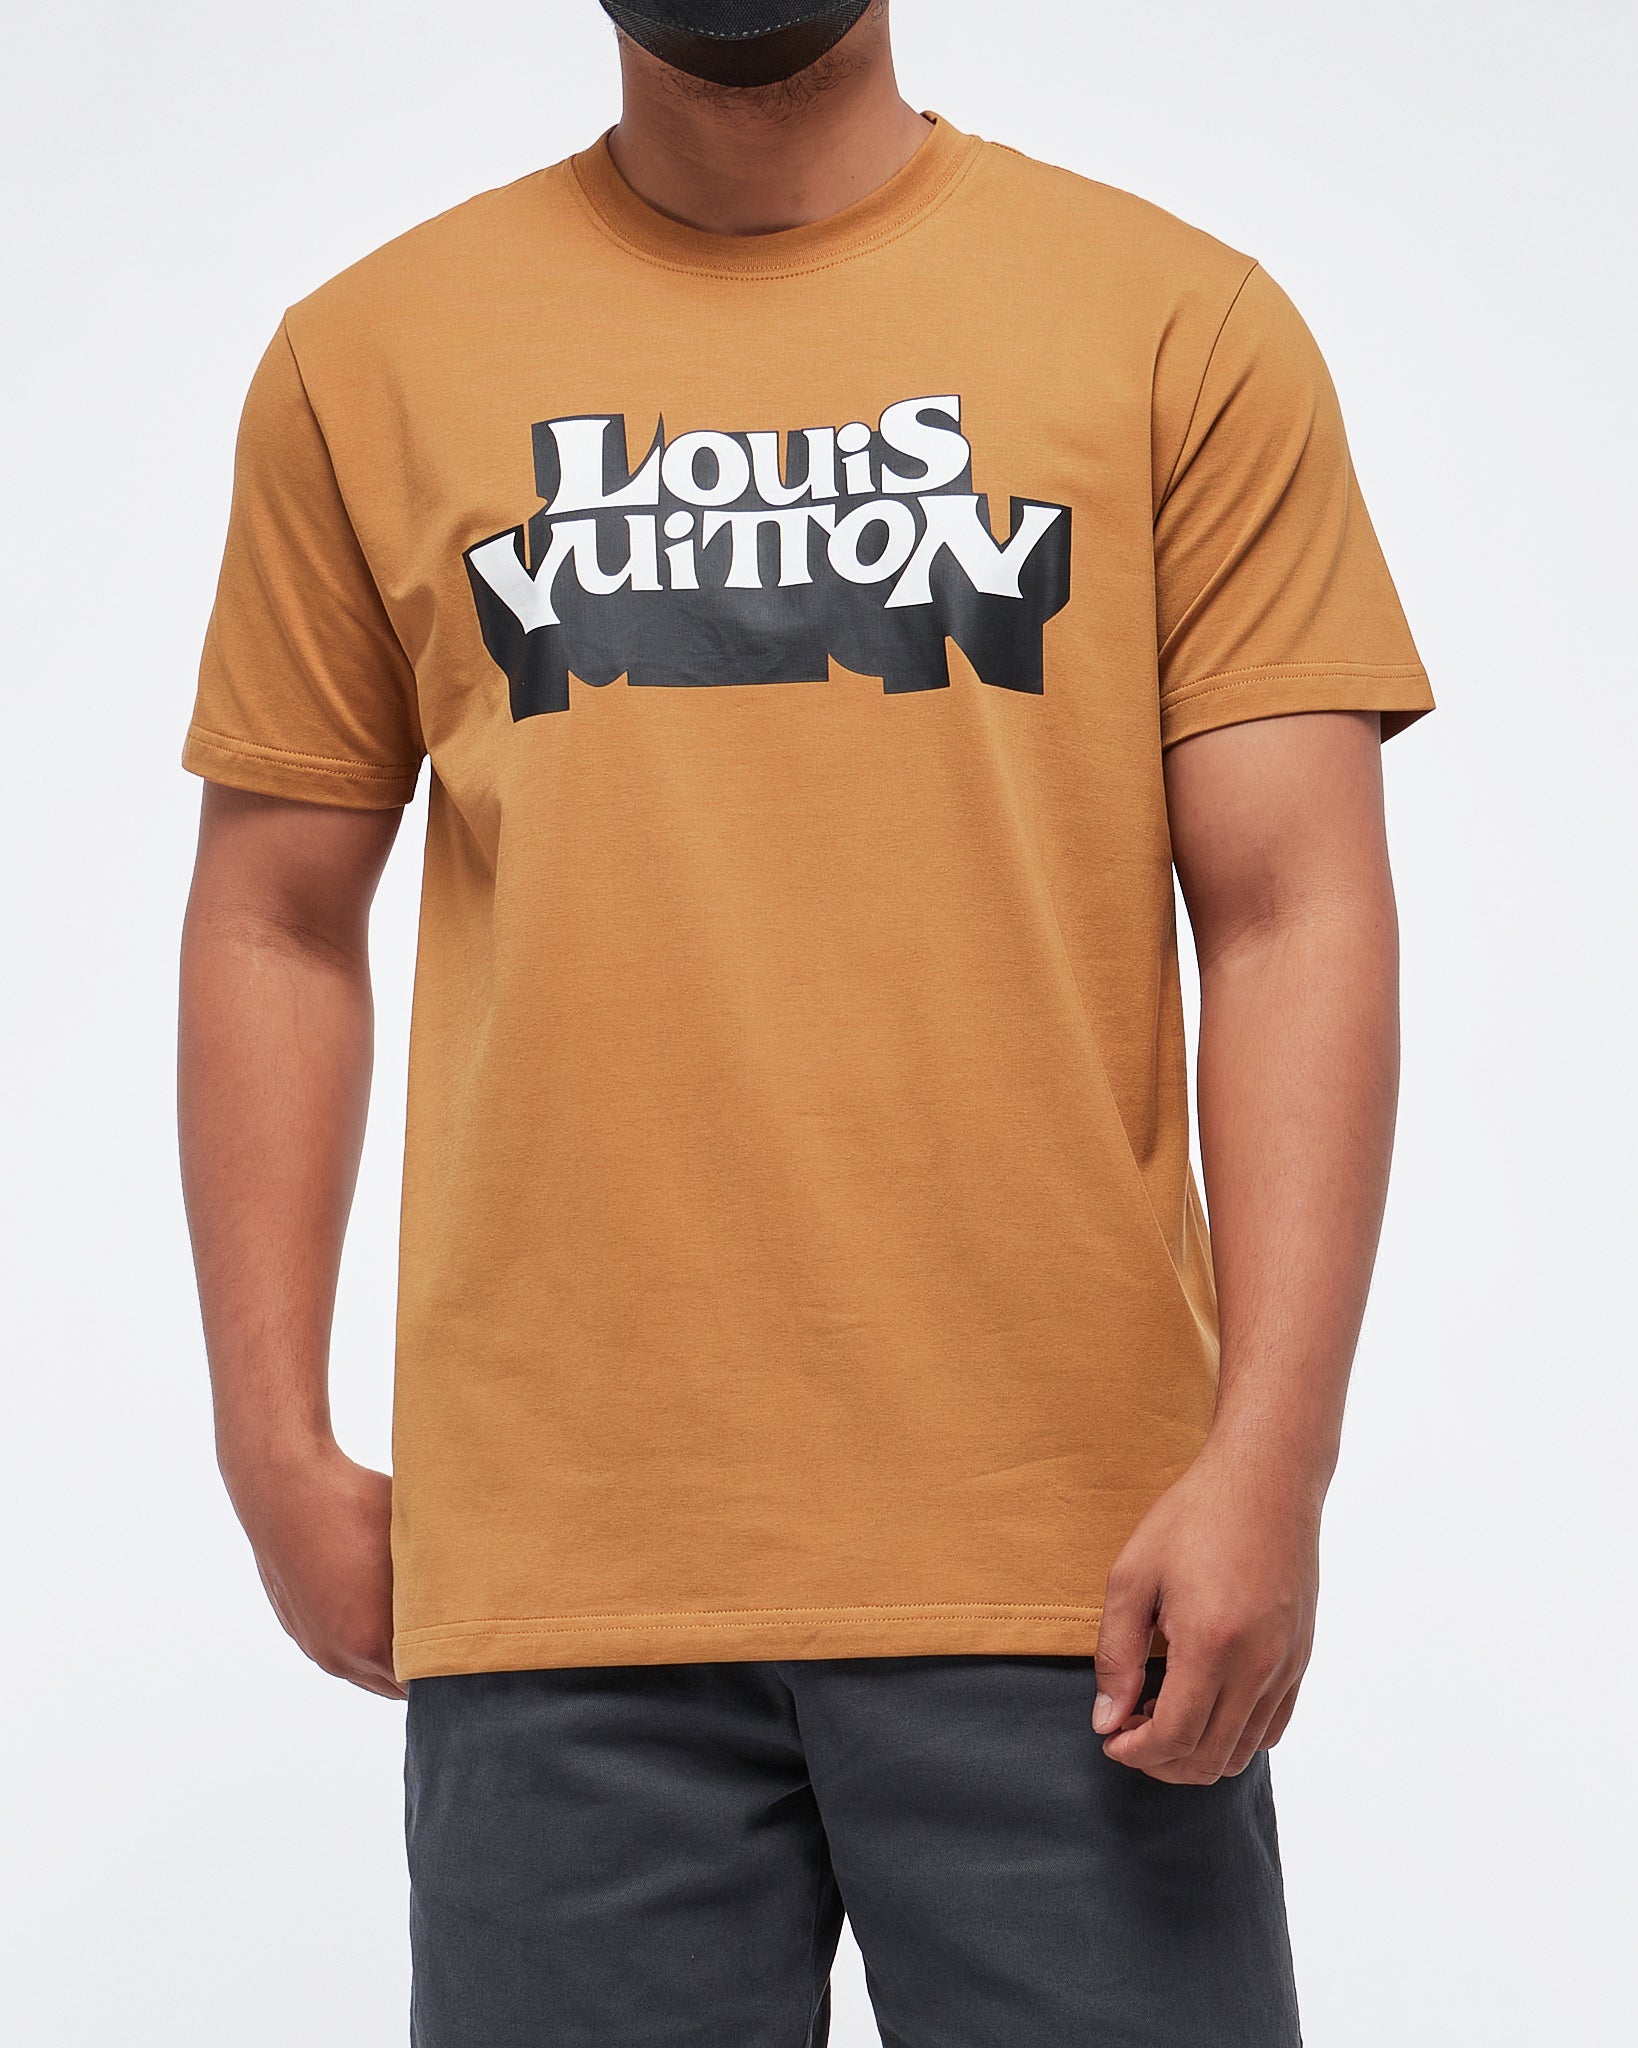 Tshirts and Polos  Men  LOUIS VUITTON